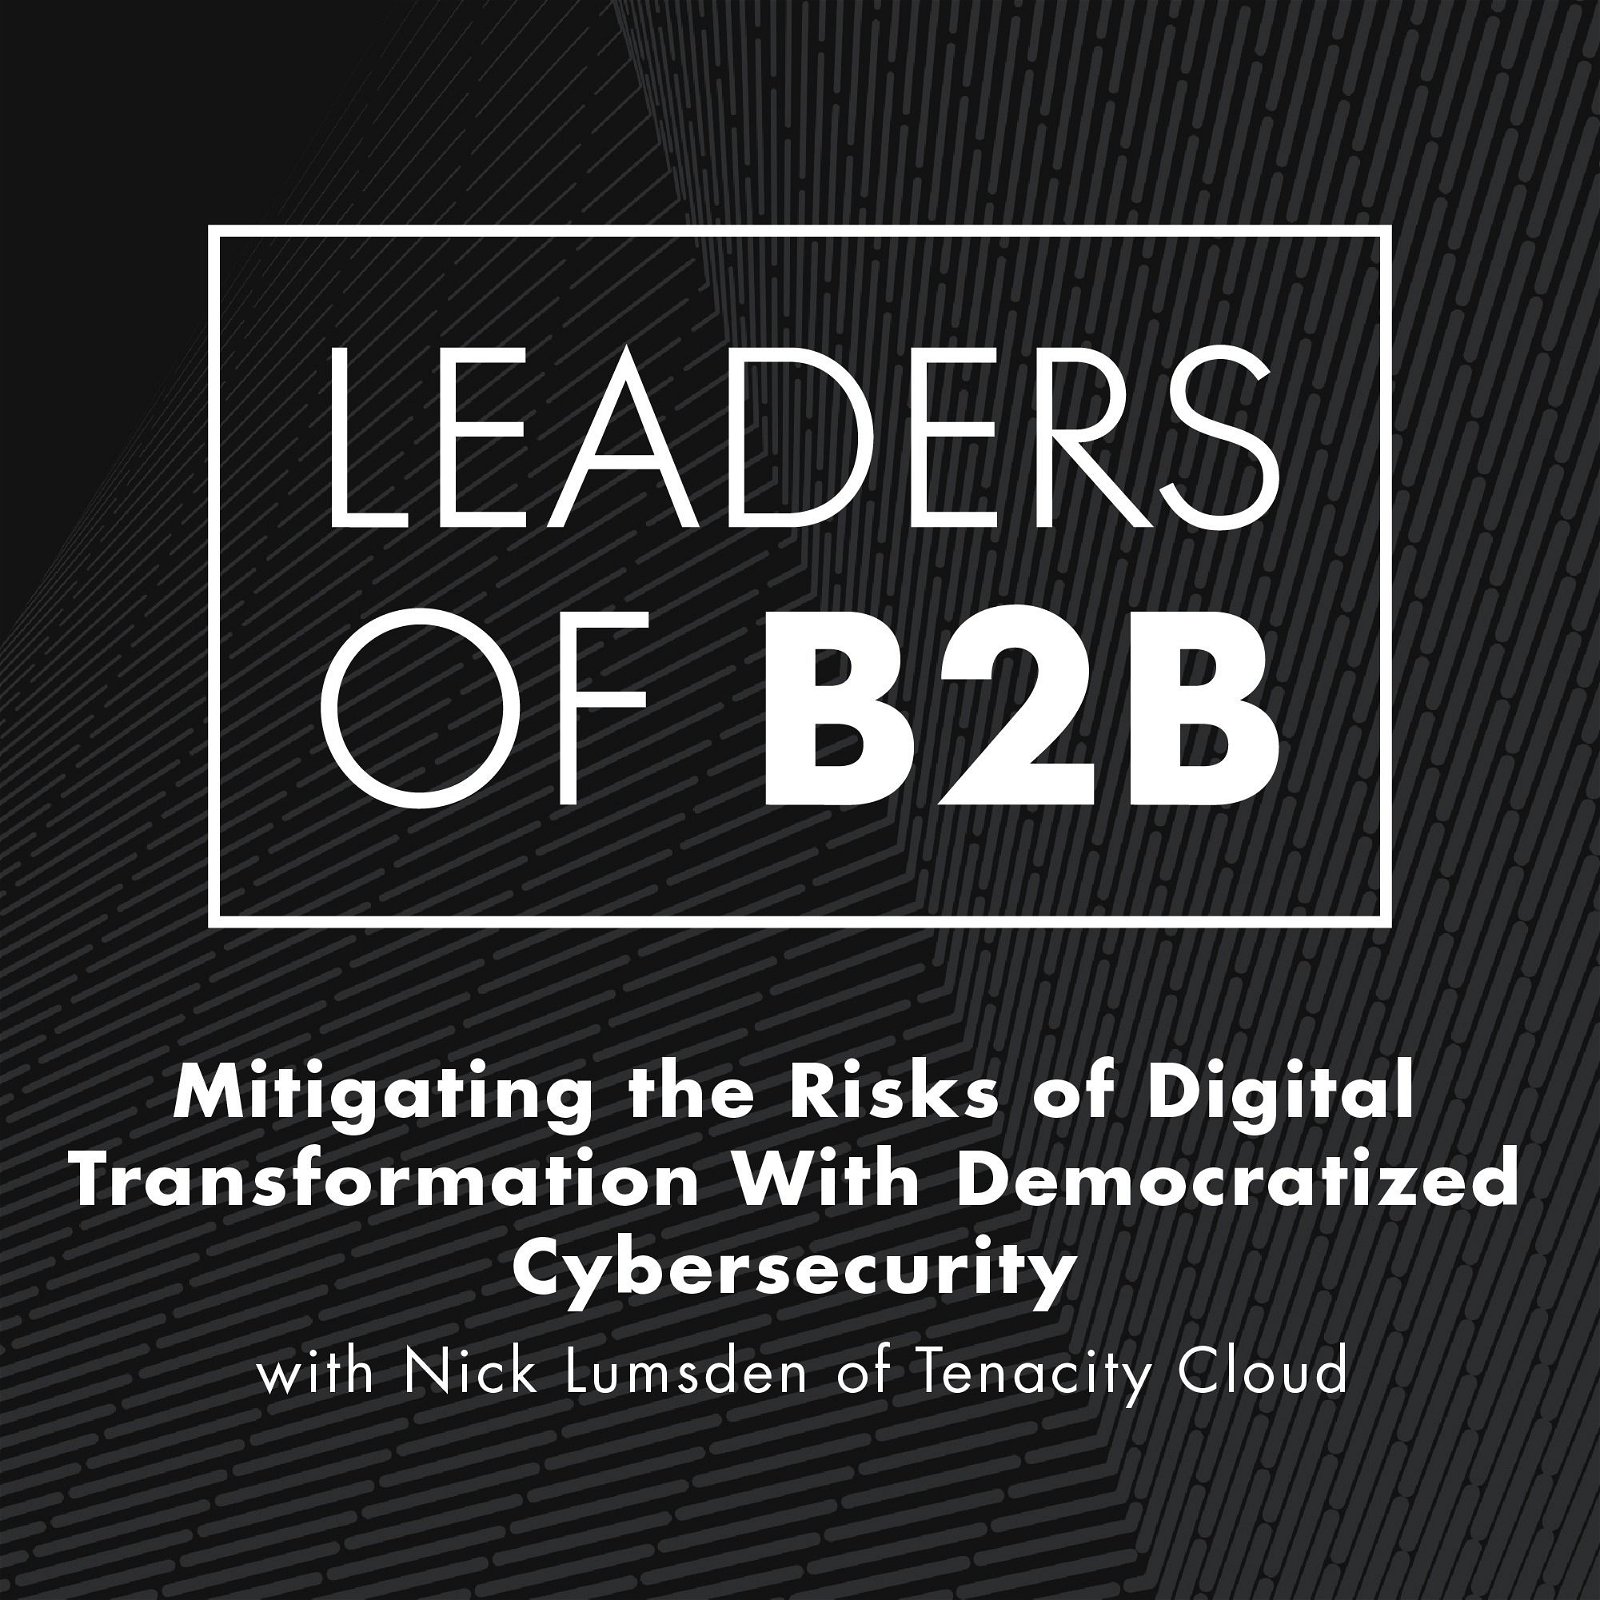 Mitigating the Risks of Digital Transformation With Democratized Cybersecurity with Nick Lumsden of Tenacity Cloud